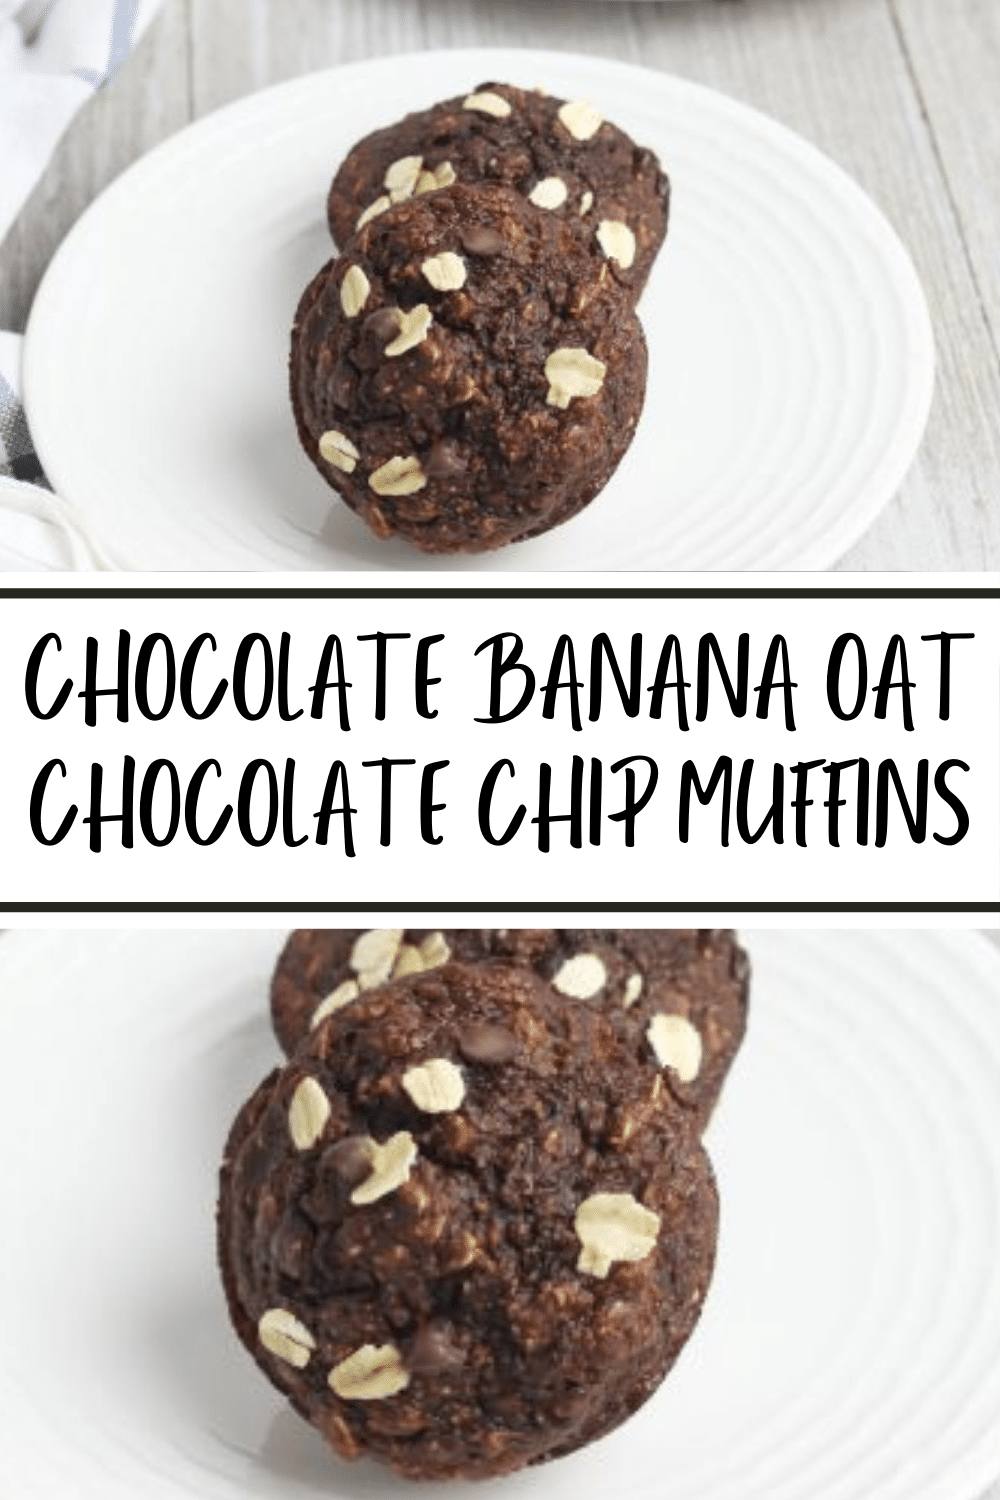 These Chocolate Banana Oat Chocolate Chip Muffins are packed with filling and healthy ingredients. Perfect for breakfast or snack time. #muffins #breakfast #myWW via @wondermomwannab